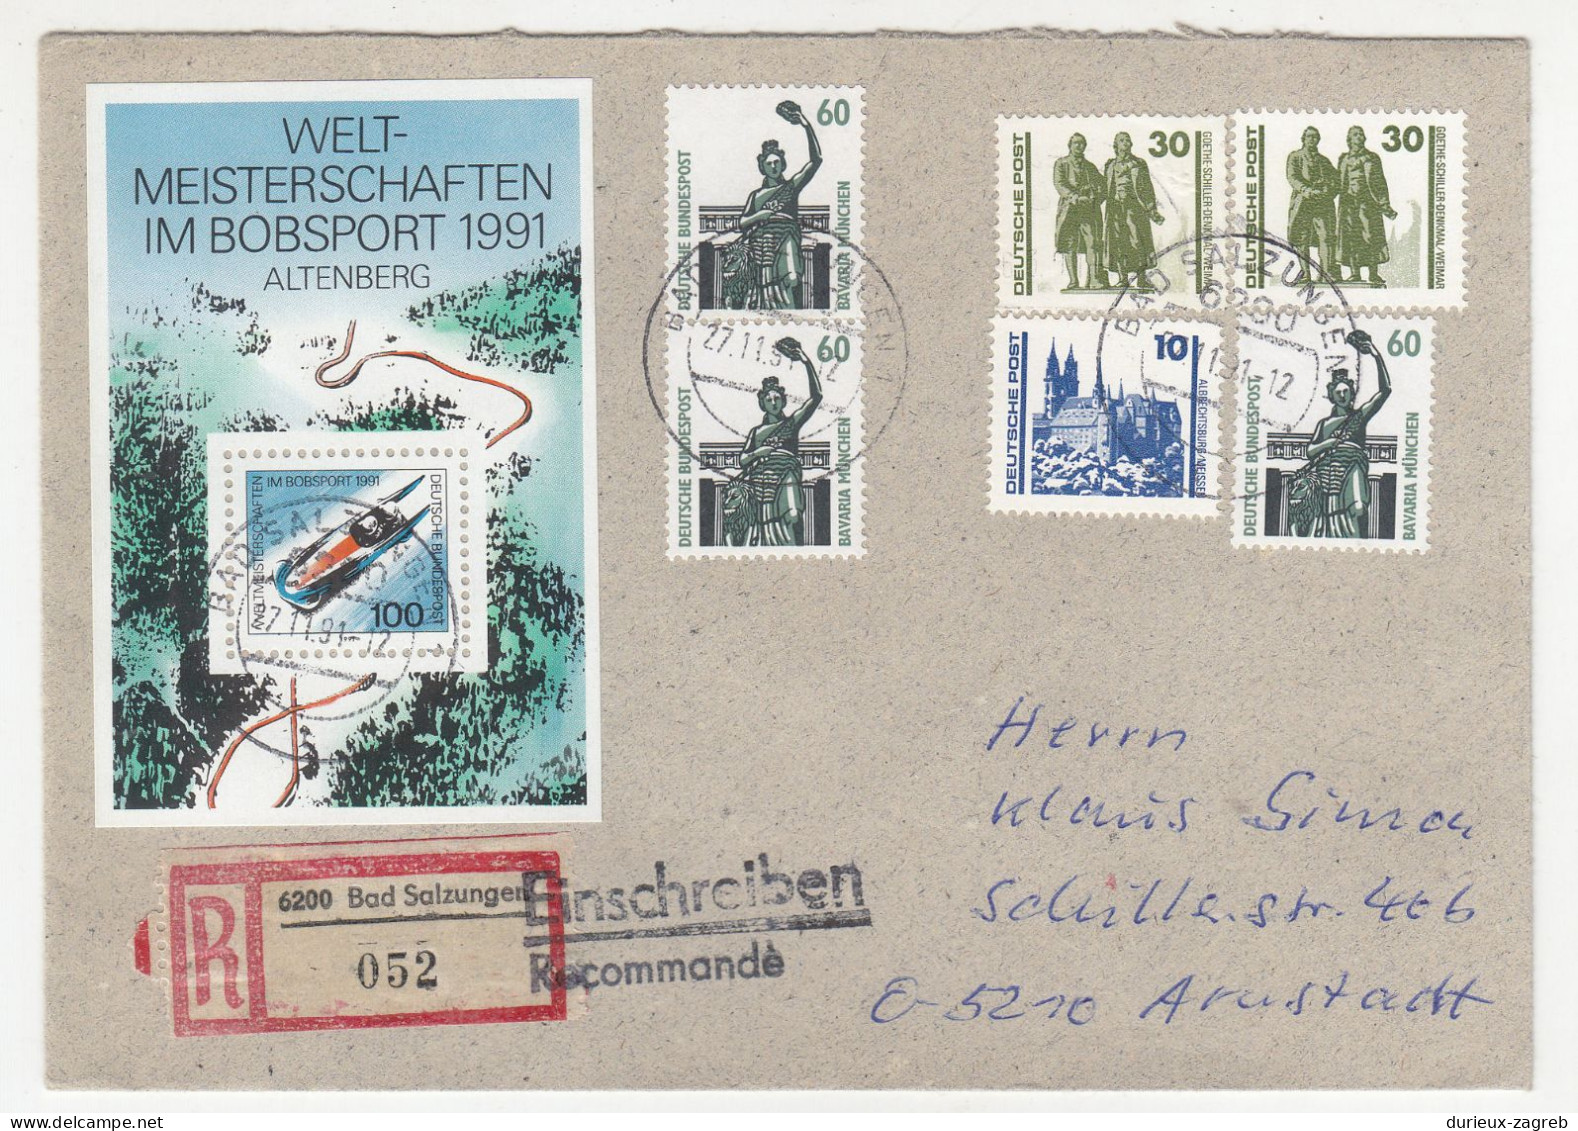 Germany Mixed Franking Germany Bund / DDR On Letter Cover Posted Registered 1991 Bad Salzungen B240510 - Covers & Documents